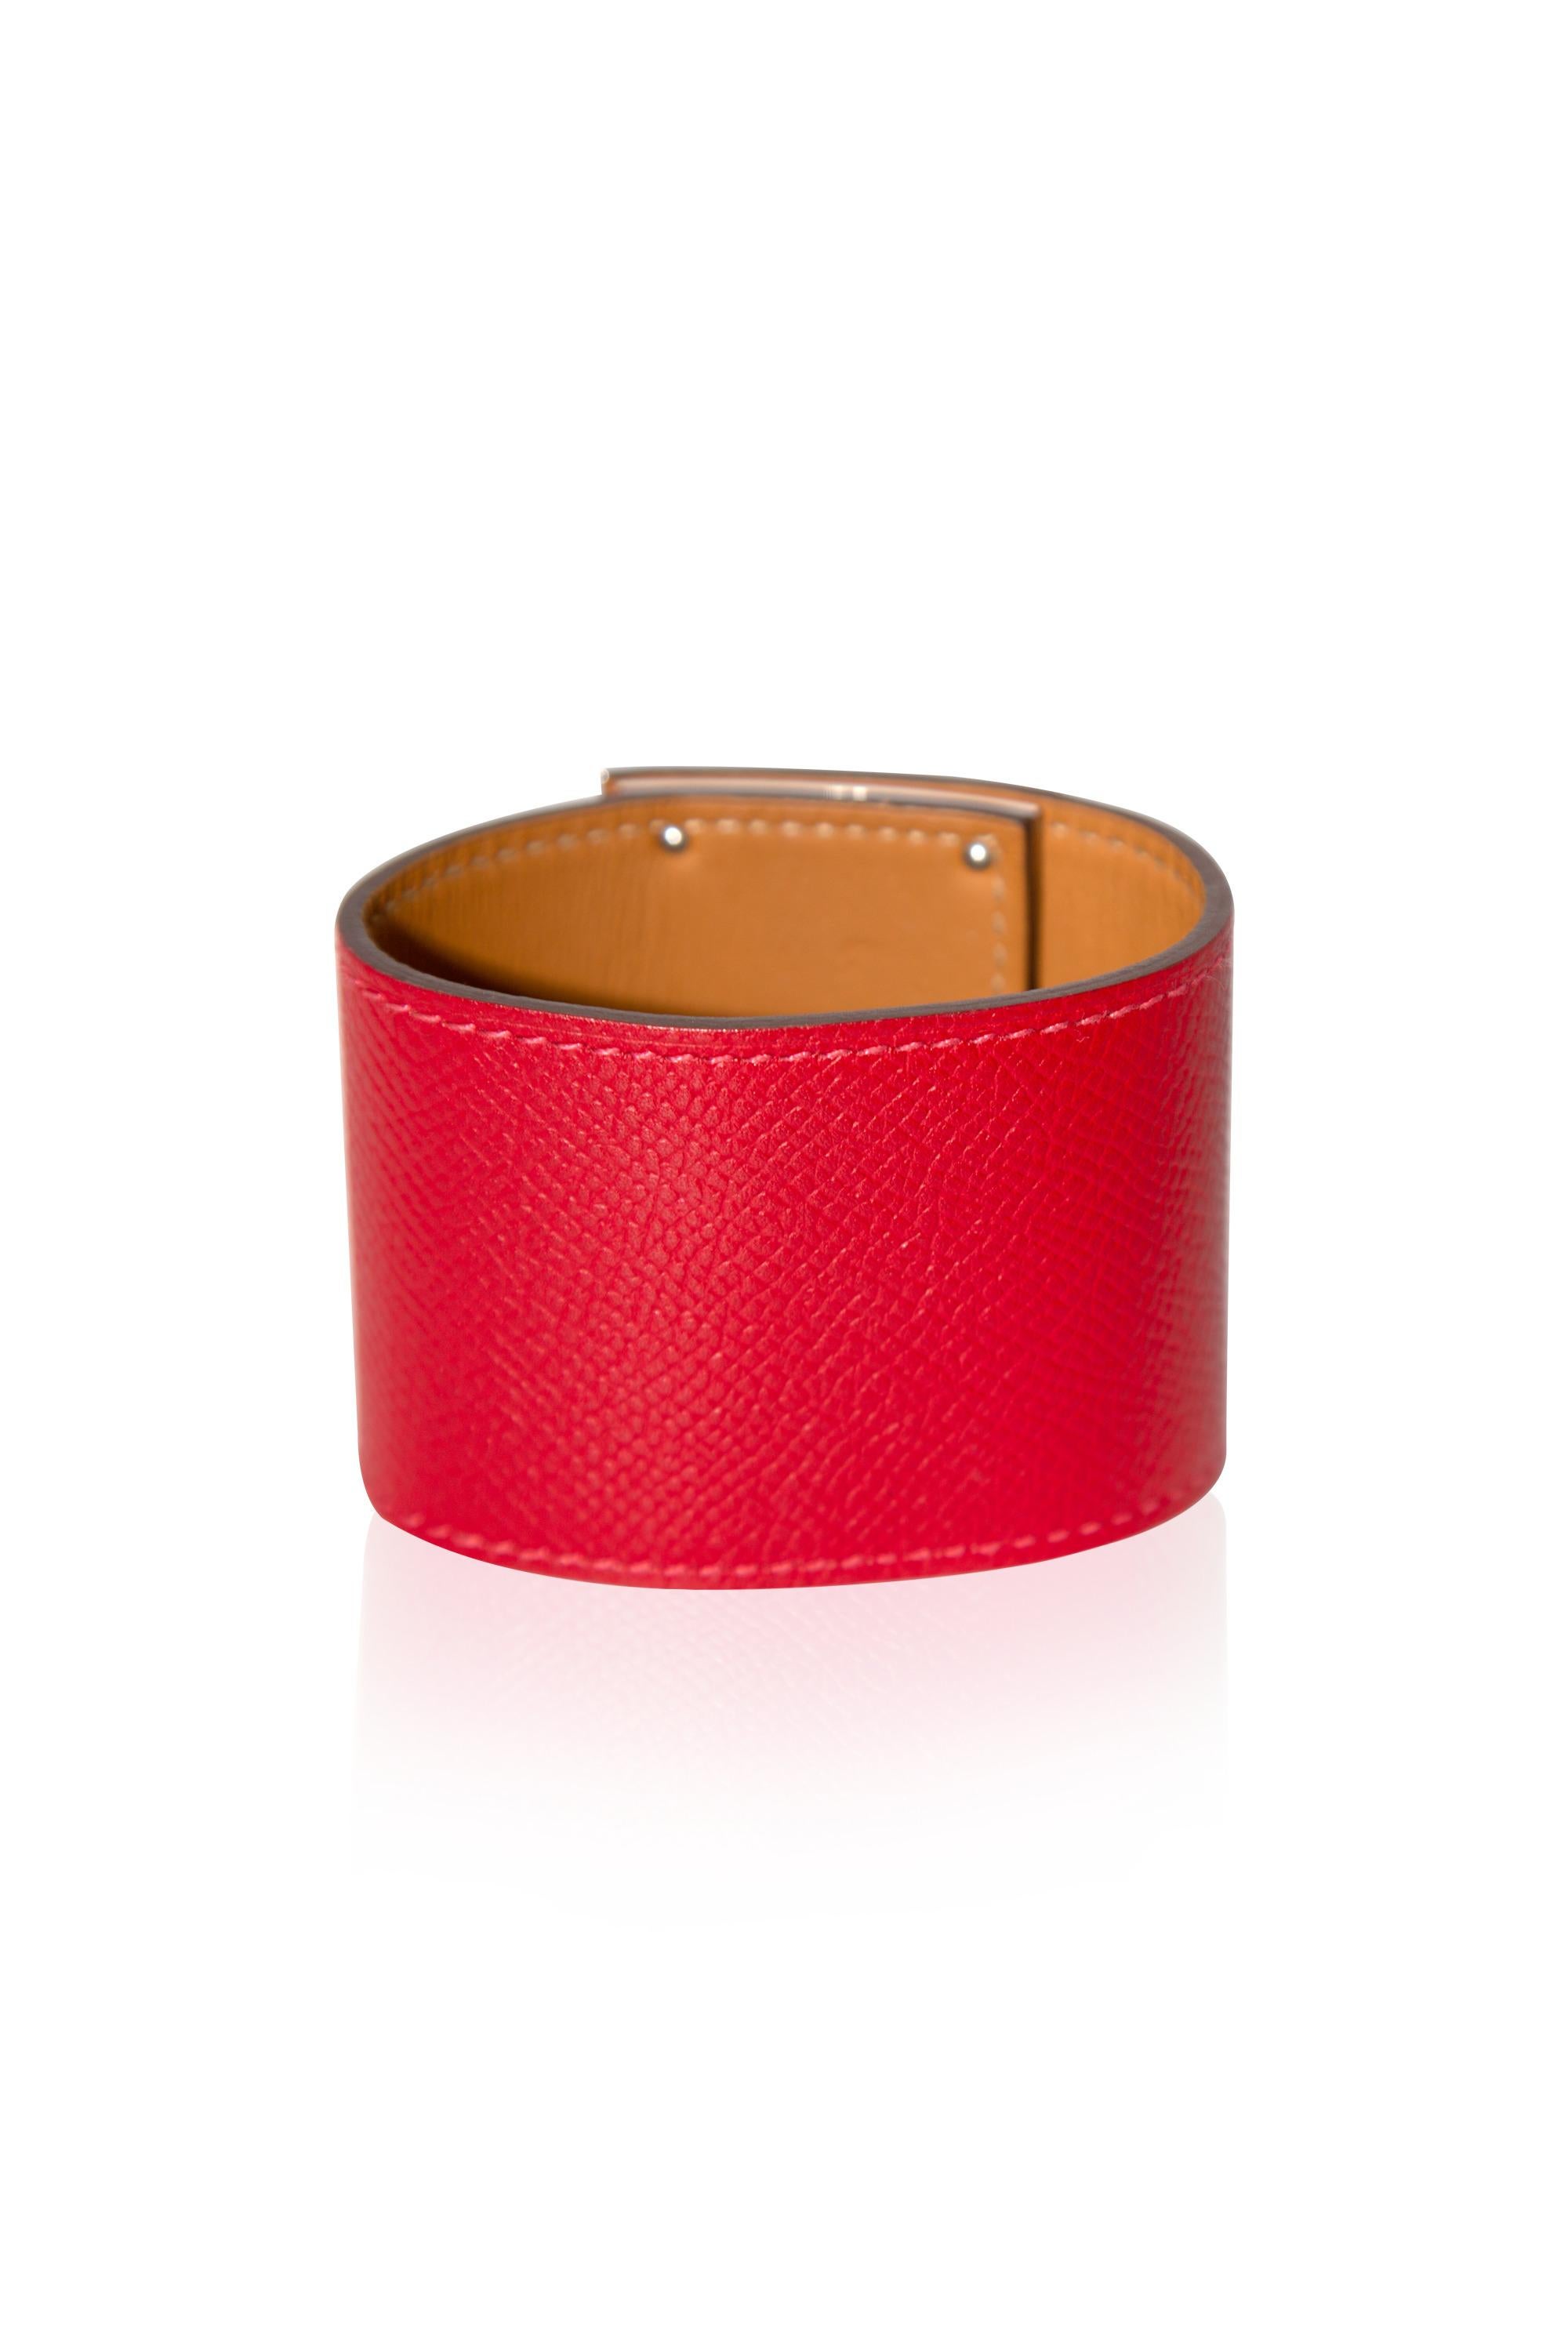 The Kelly Dog Extreme Bracelet in Epsom Red PHW from Hermès is a sleek and stylish accessory that adds a touch of luxury to any outfit.

•Epsom Leather
•Palladium Hardware
•Iconic Kelly Dog design and gleaming gold hardware
•It is the perfect